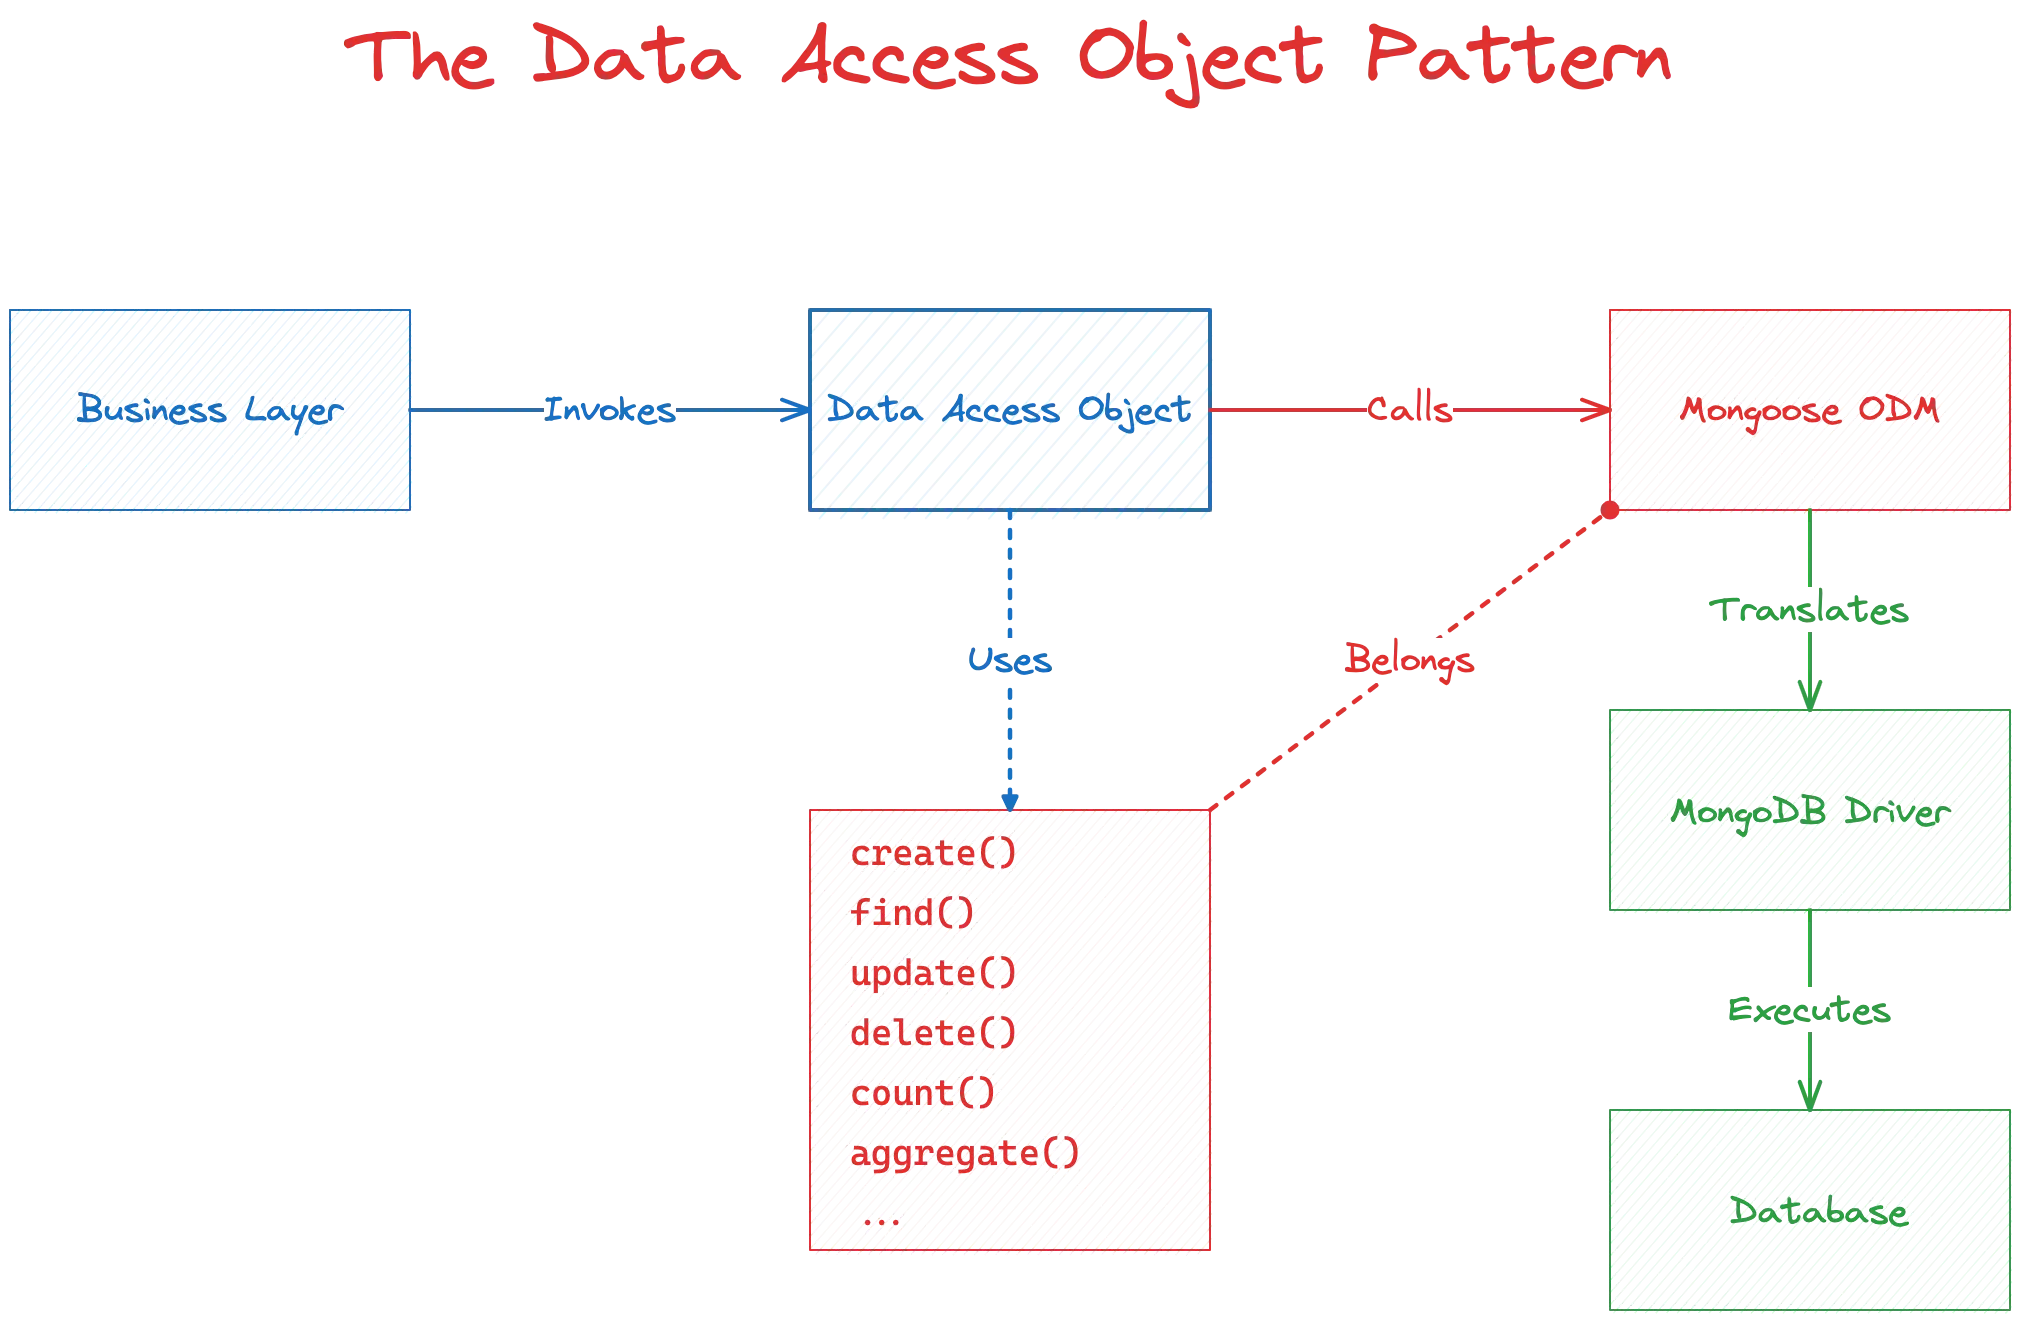 The Data Access Object Pattern